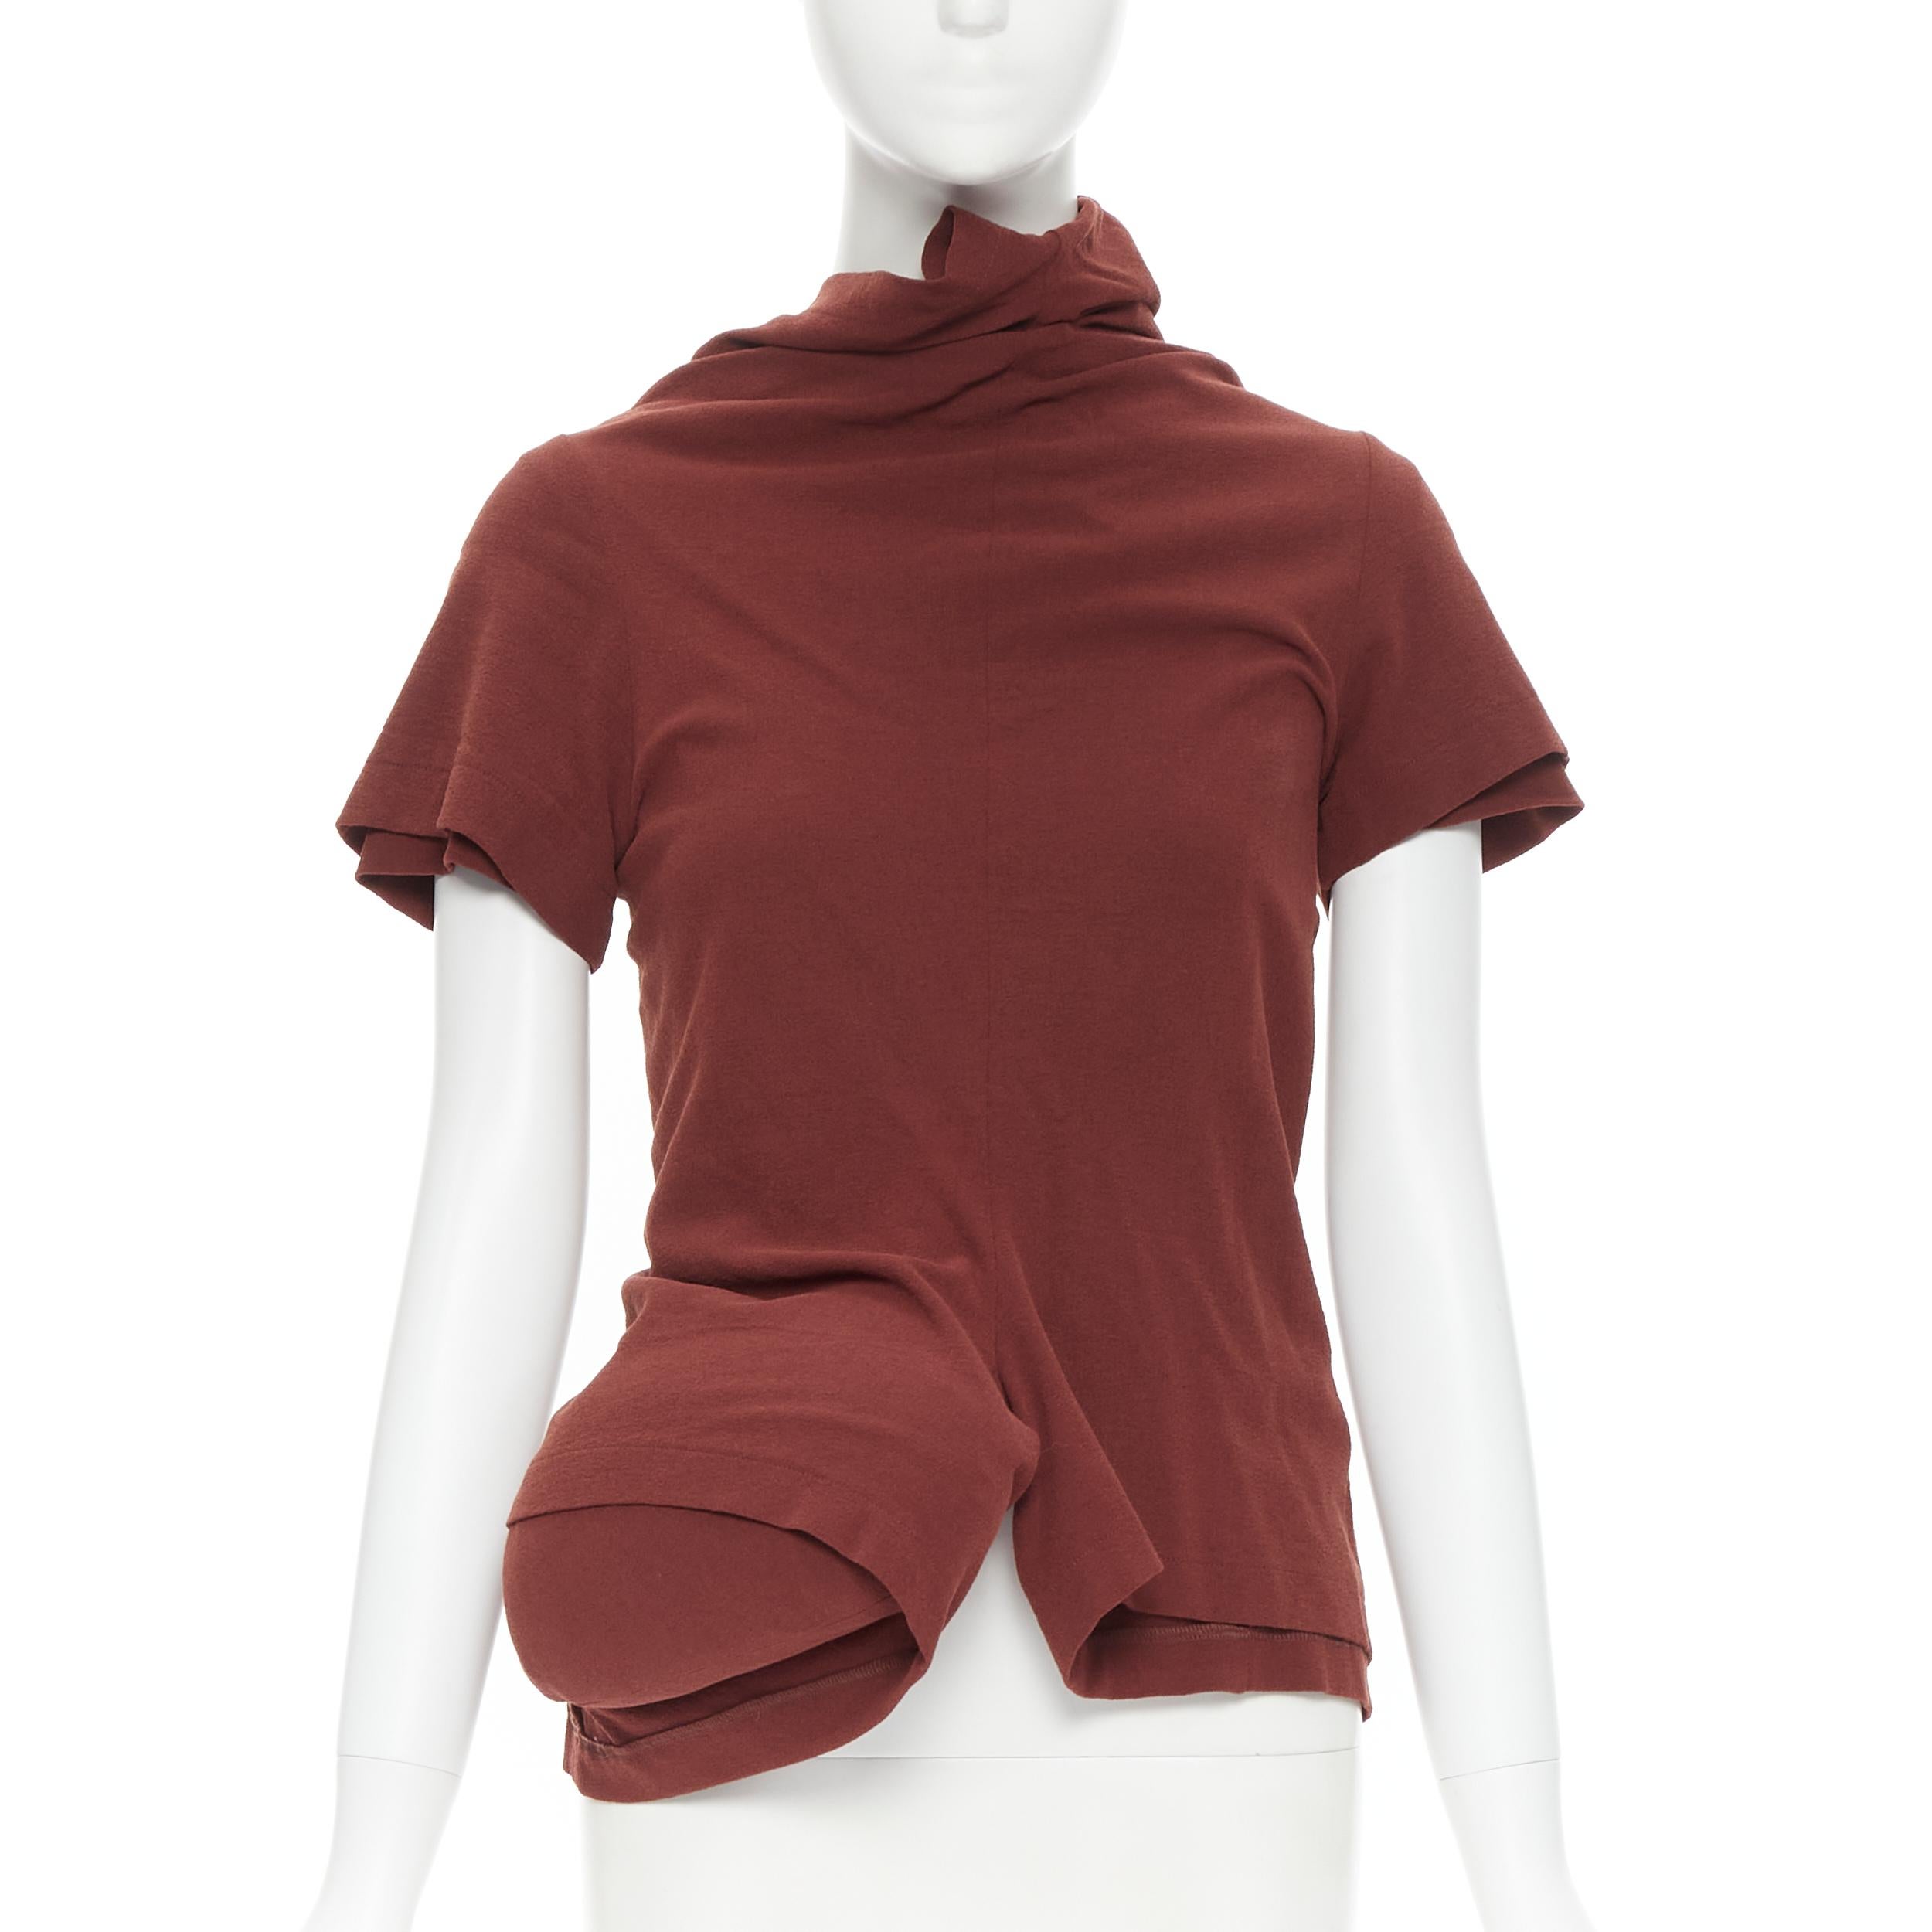 rare COMME DES GARCONS 1997 Lumps Bumps padded cushions irregular cut top M 
Reference: TGAS/A06031 
Brand: Comme Des Garcons 
Designer: Rei Kawakubo 
Collection: Spring Summer 1997 Runway 
Material: Viscose 
Color: Brown 
Pattern: Solid 
Extra